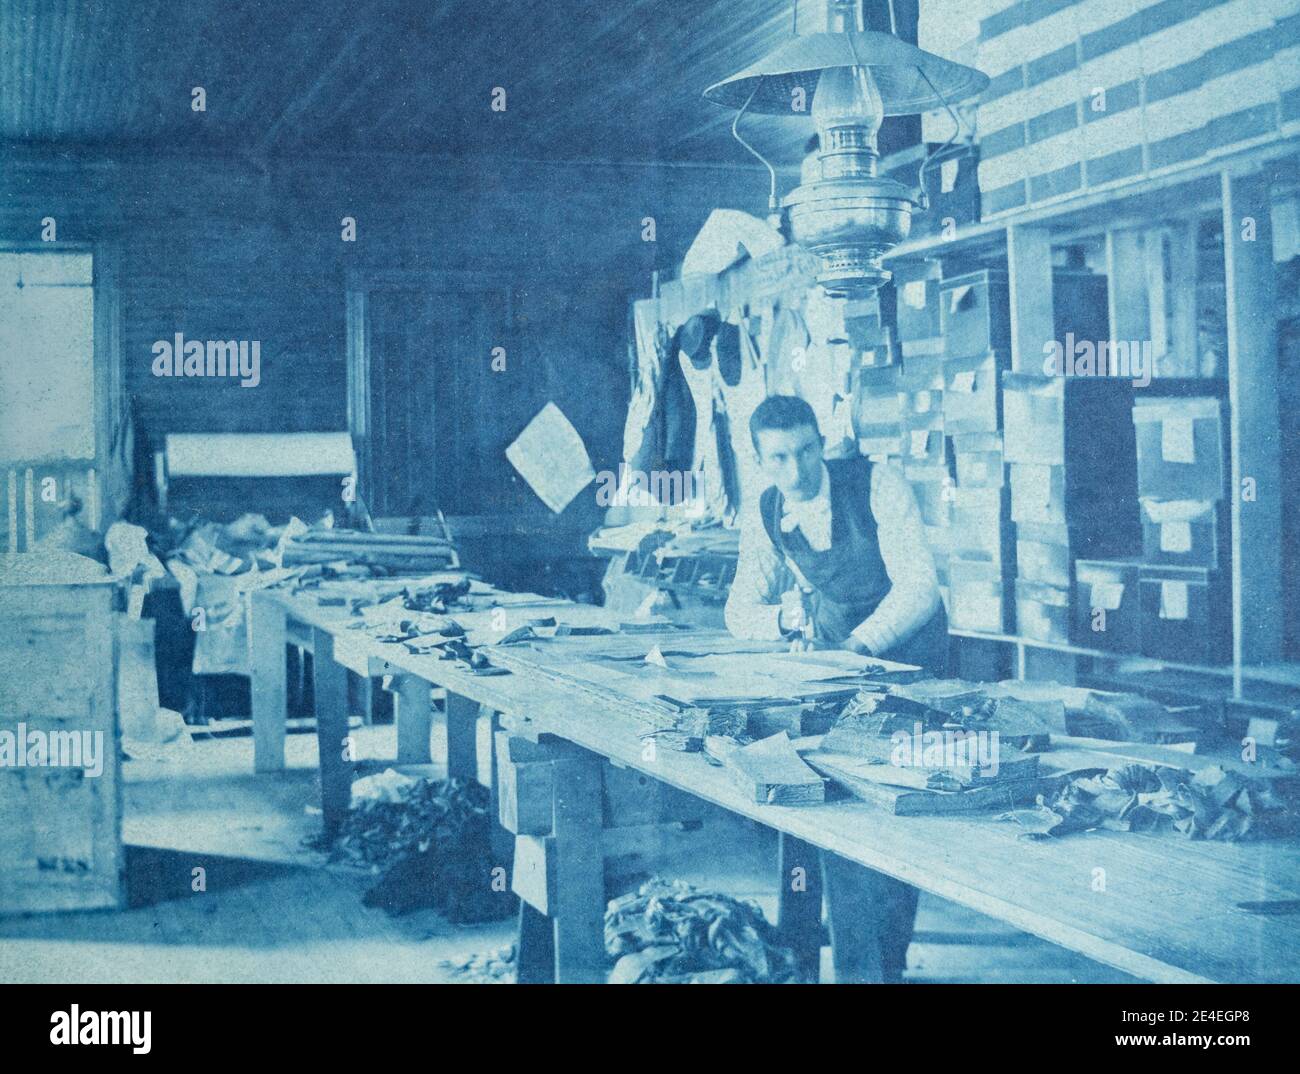 American archive cyanotype portrait of a man working at a workshop bench with a large oil lamp hanging from the ceiling. Taken in the late 19th century in Port Byron, NY, USA Stock Photo